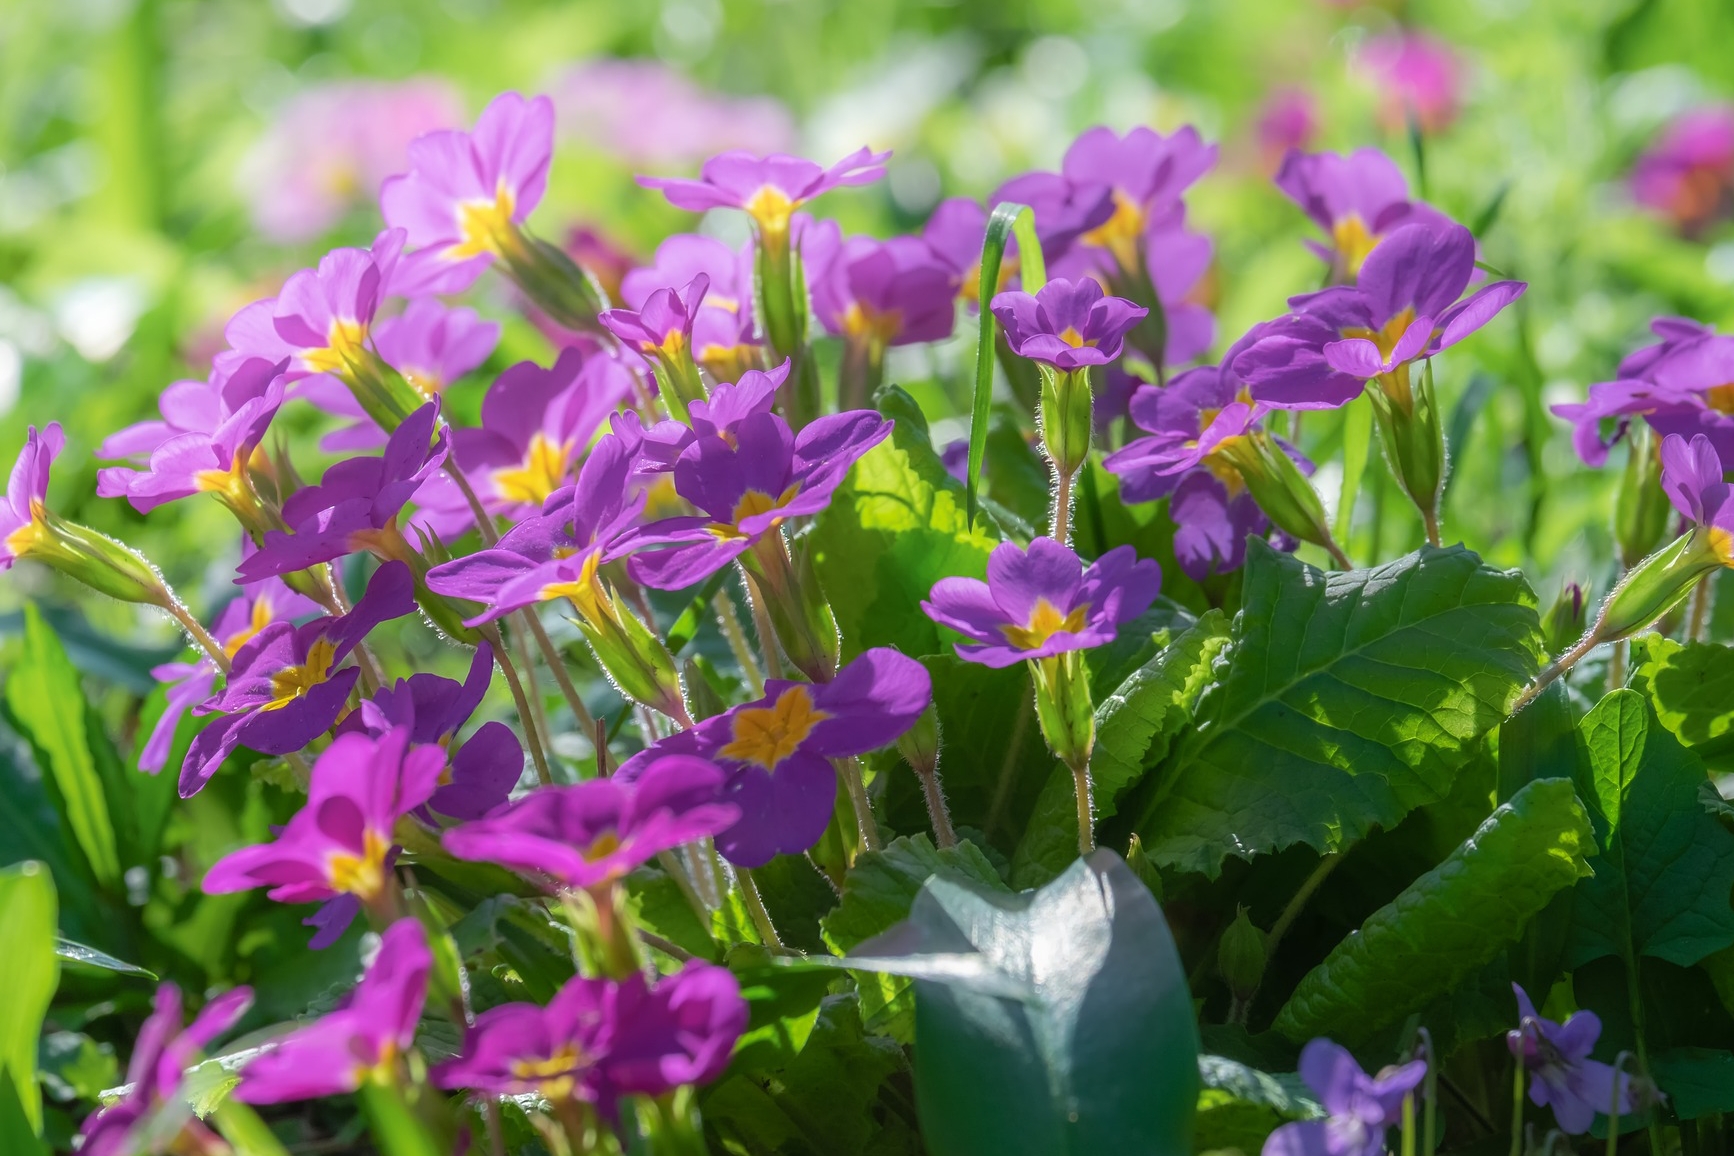 February Birth Flowers Primrose And Violet What Do They Mean The Old Farmer S Almanac